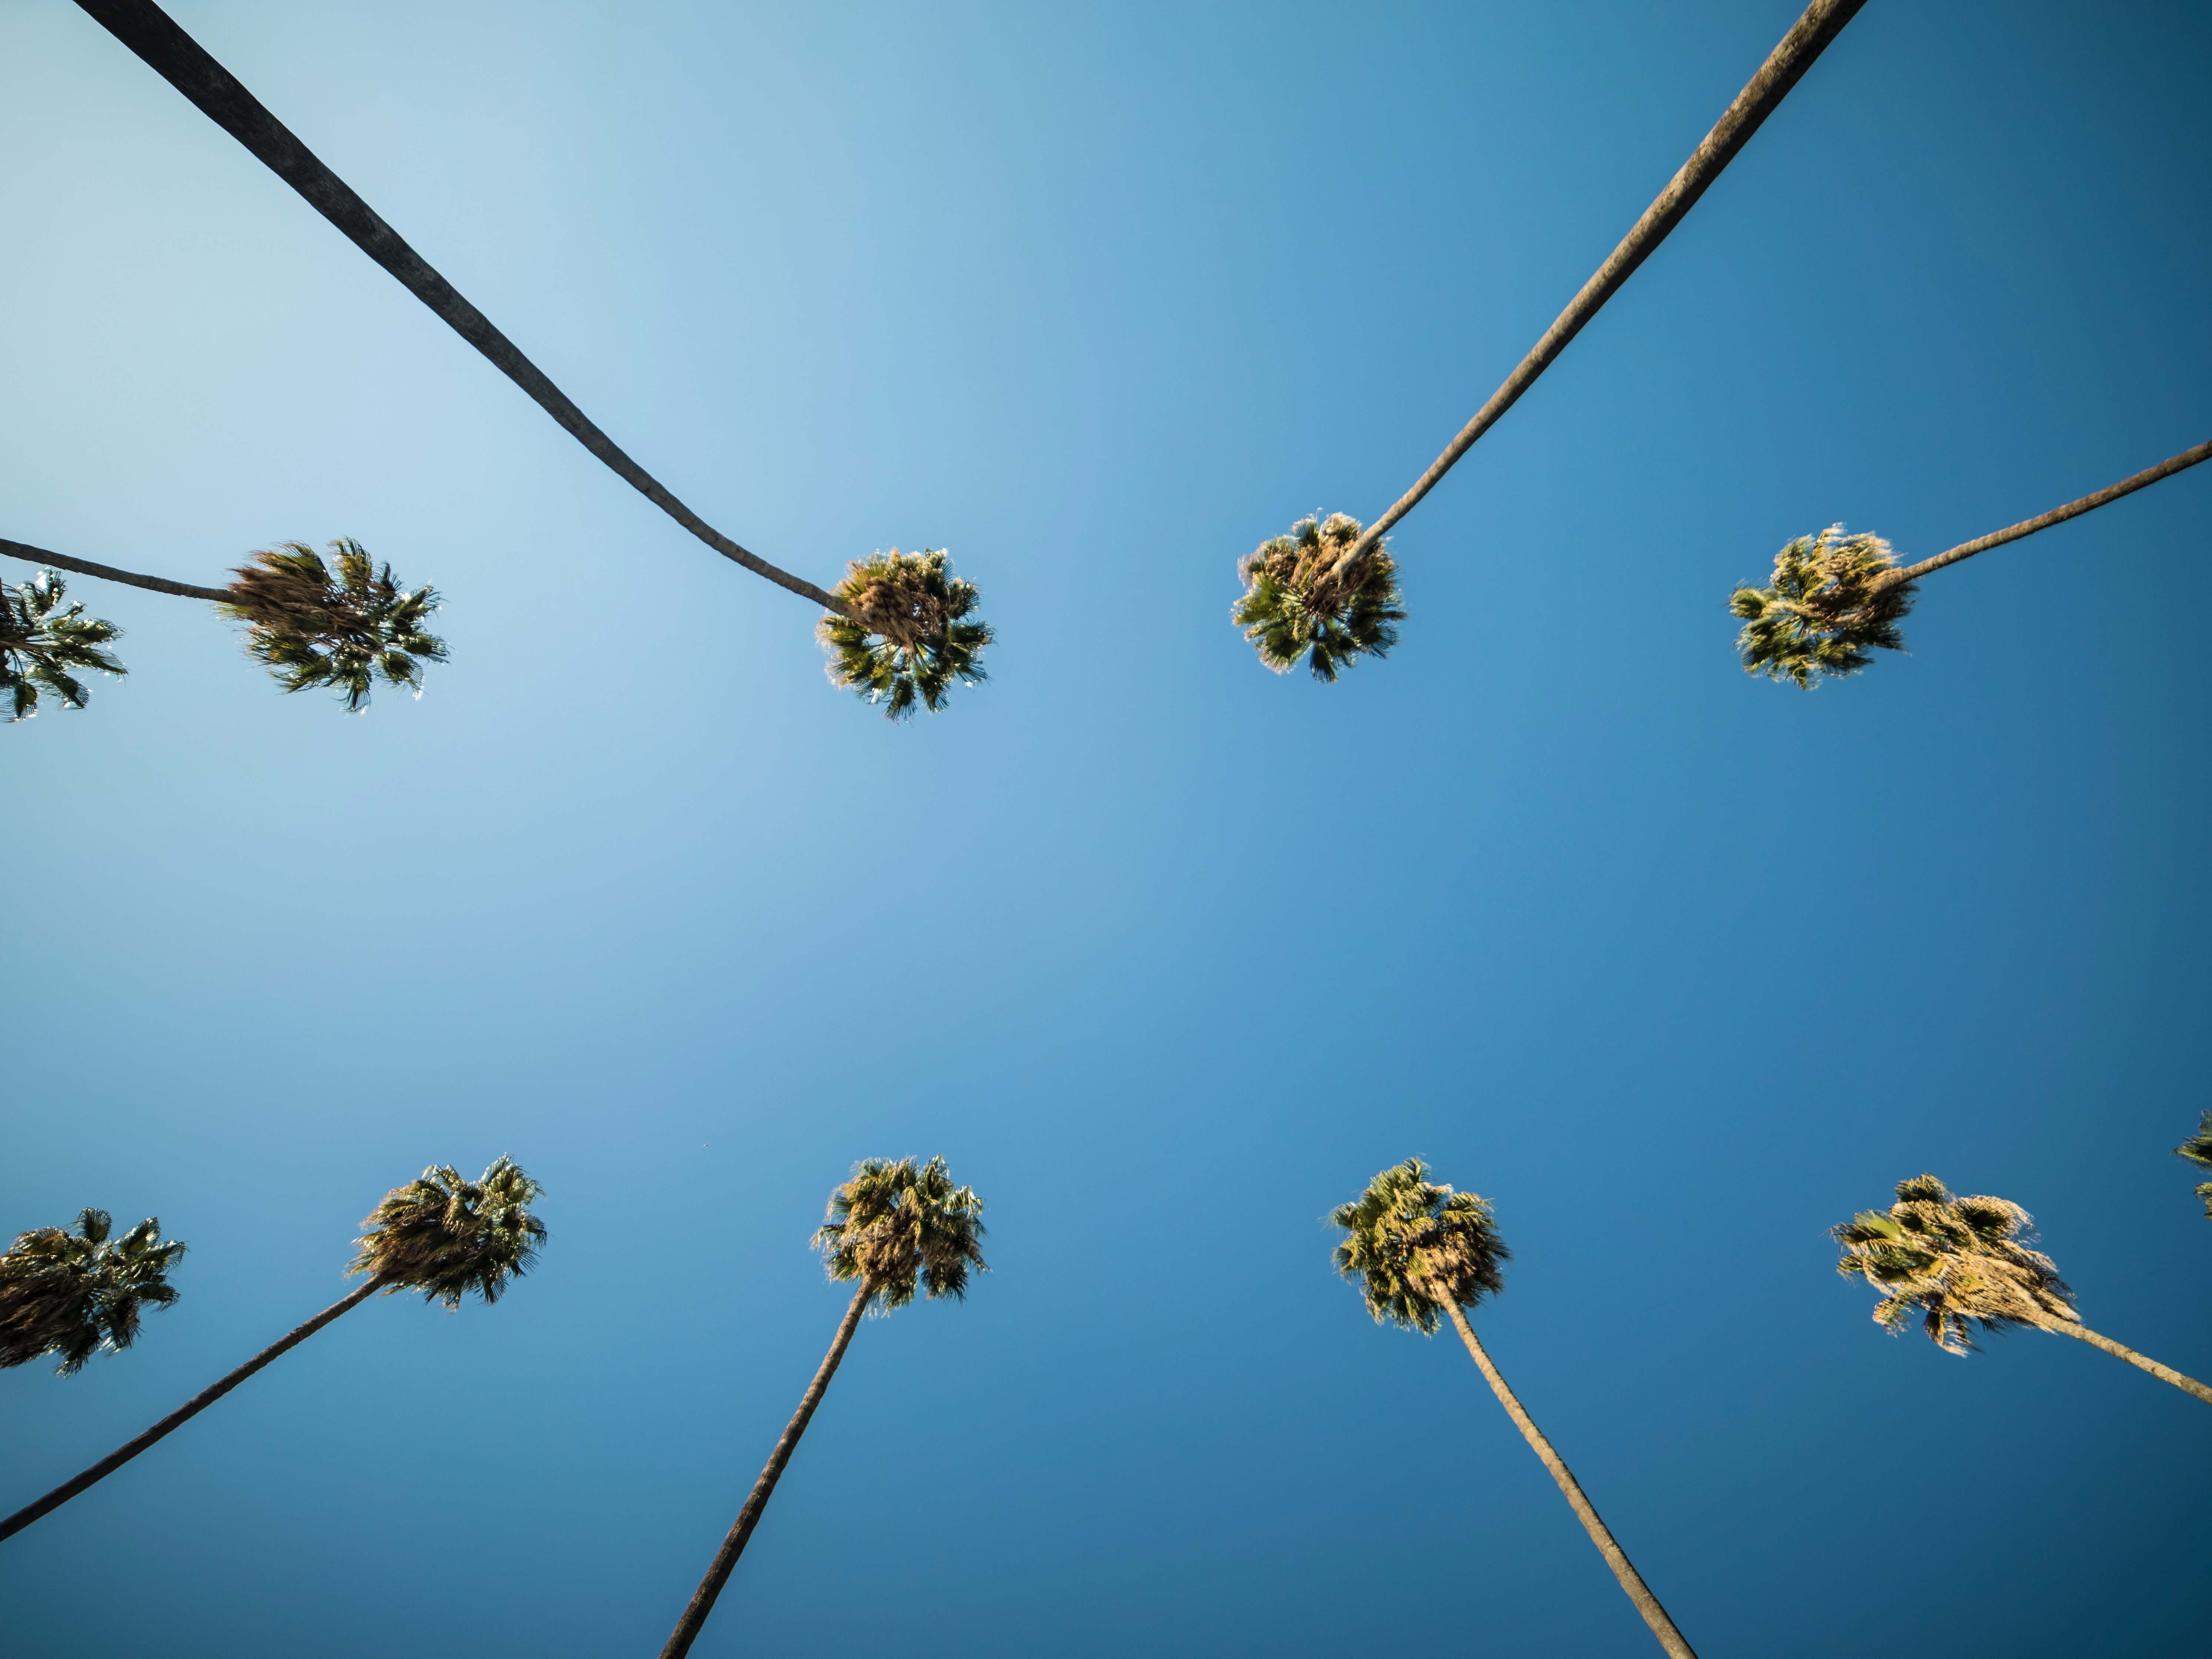 skyward image in los angeles looking at palm trees